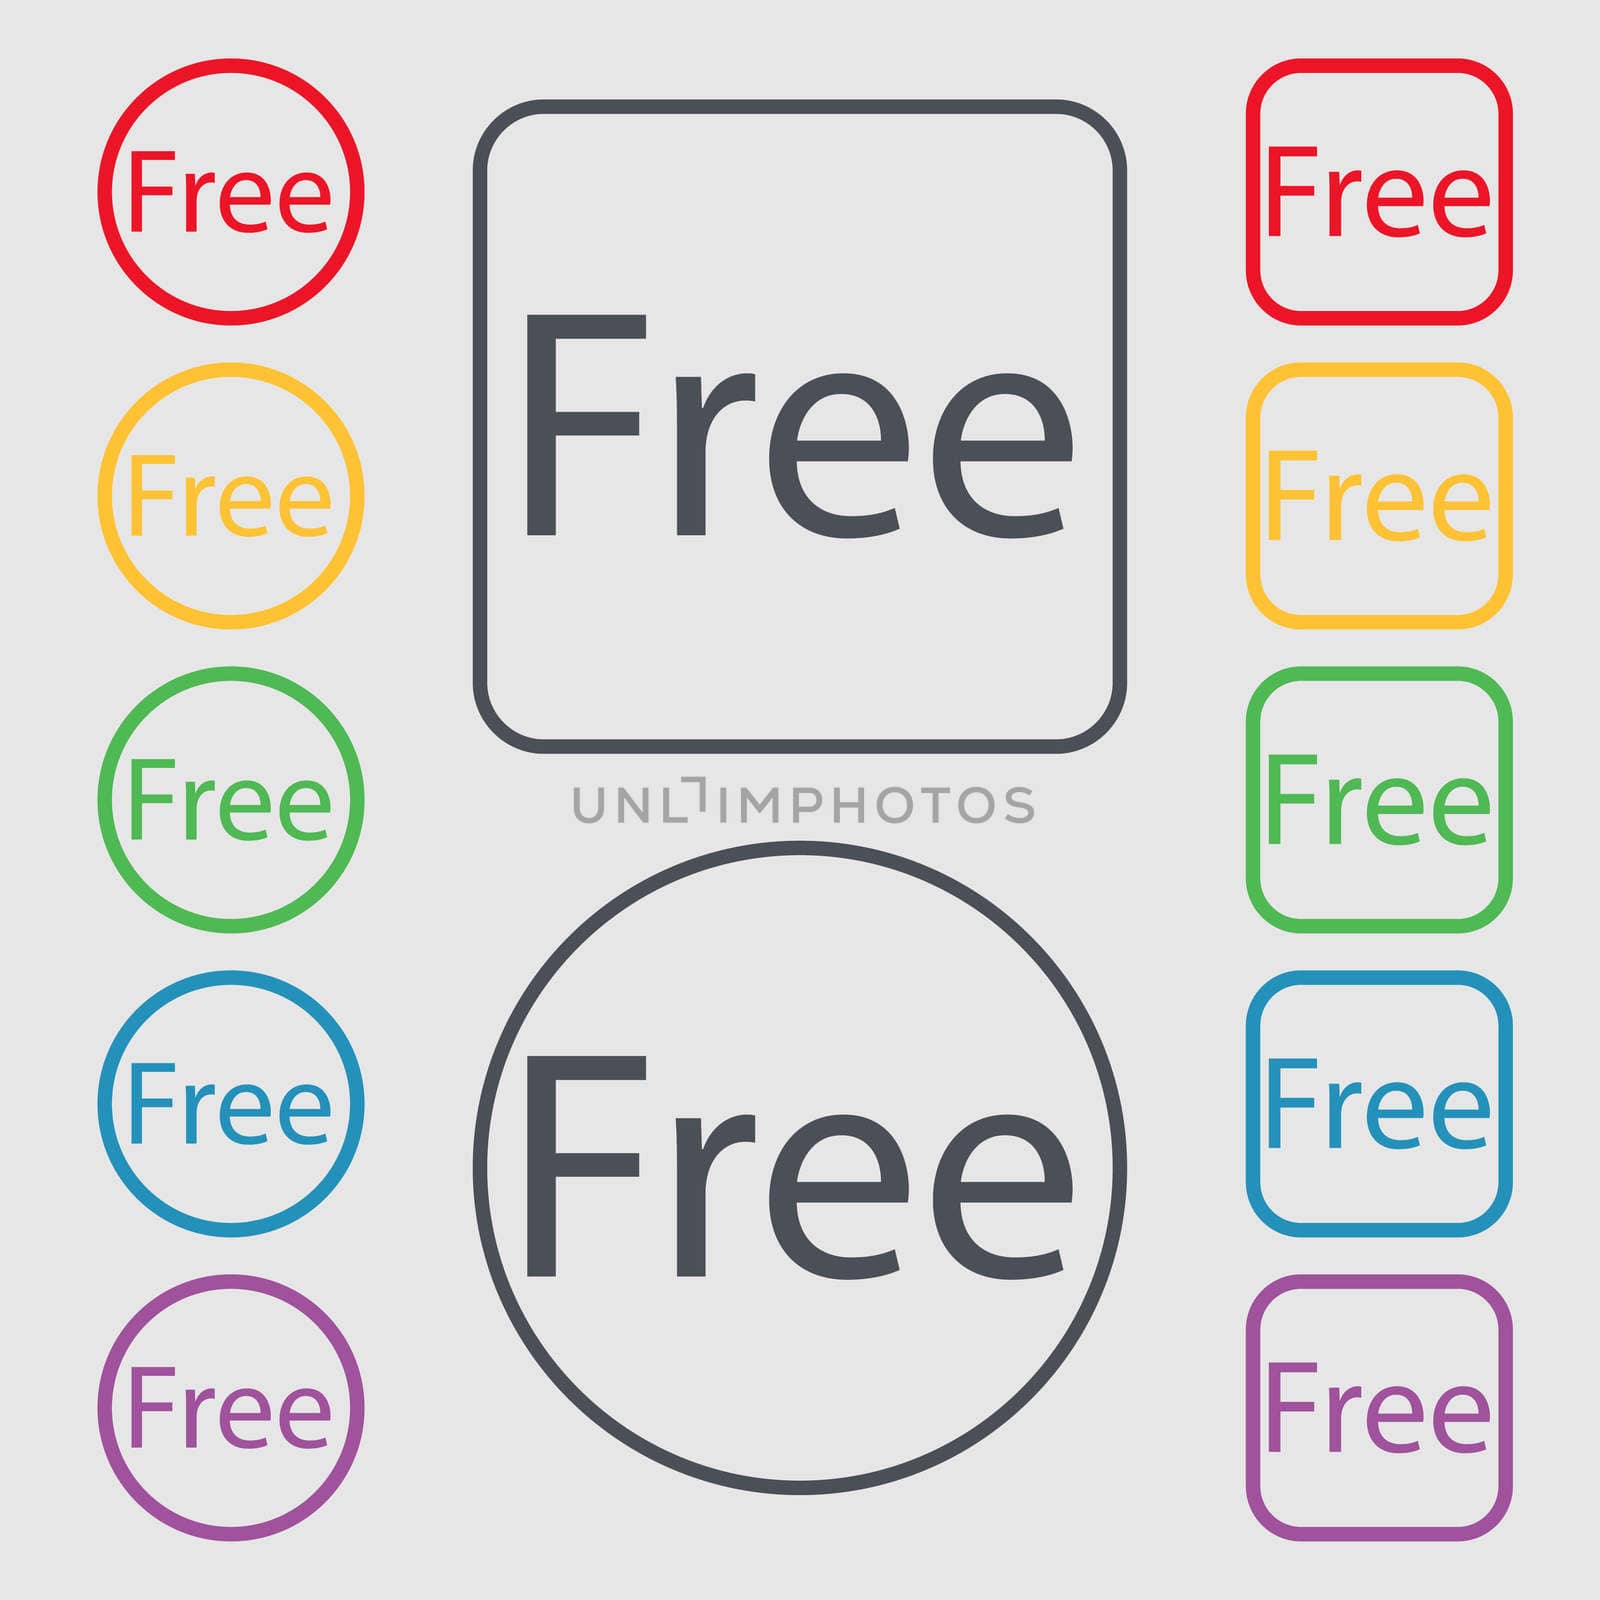 Free sign icon. Special offer symbol. Symbols on the Round and square buttons with frame. illustration